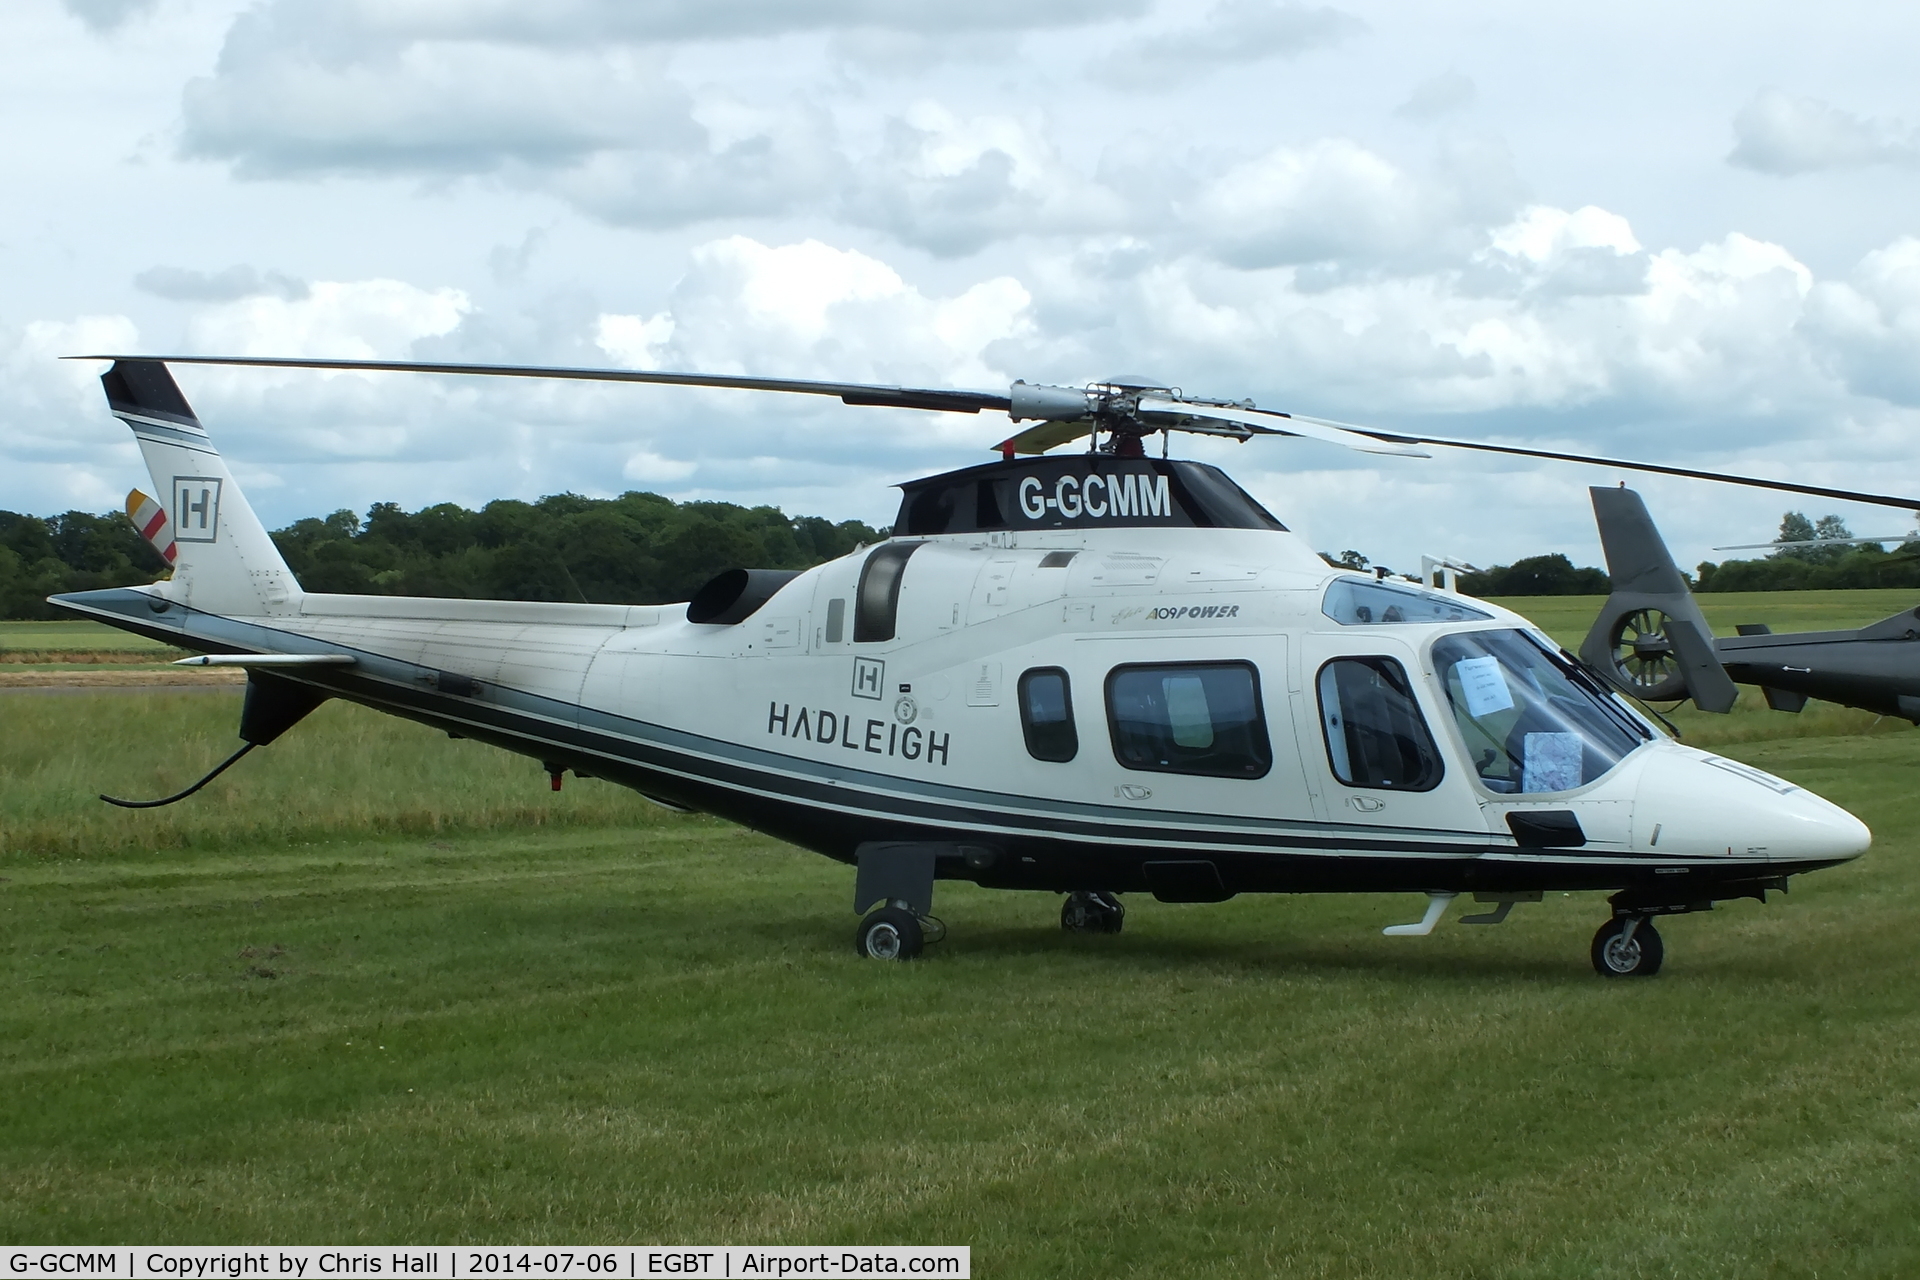 G-GCMM, 2002 Agusta A-109E Power Elite C/N 11158, ferrying race fans to the British F1 Grand Prix at Silverstone